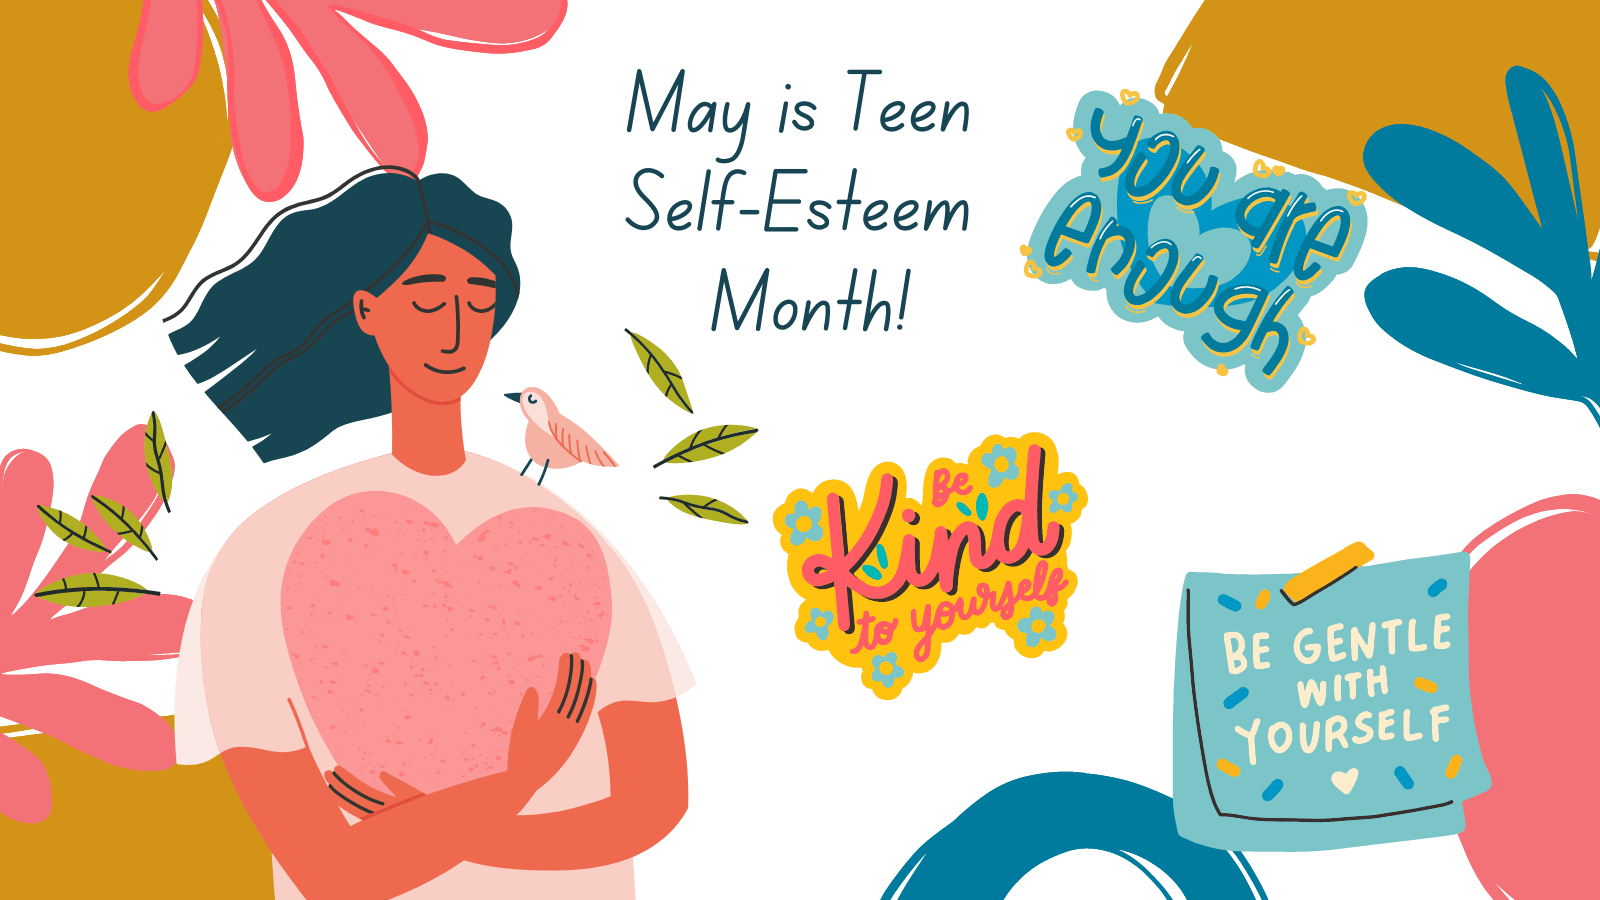 Supporting Our Teens' Self-Esteem